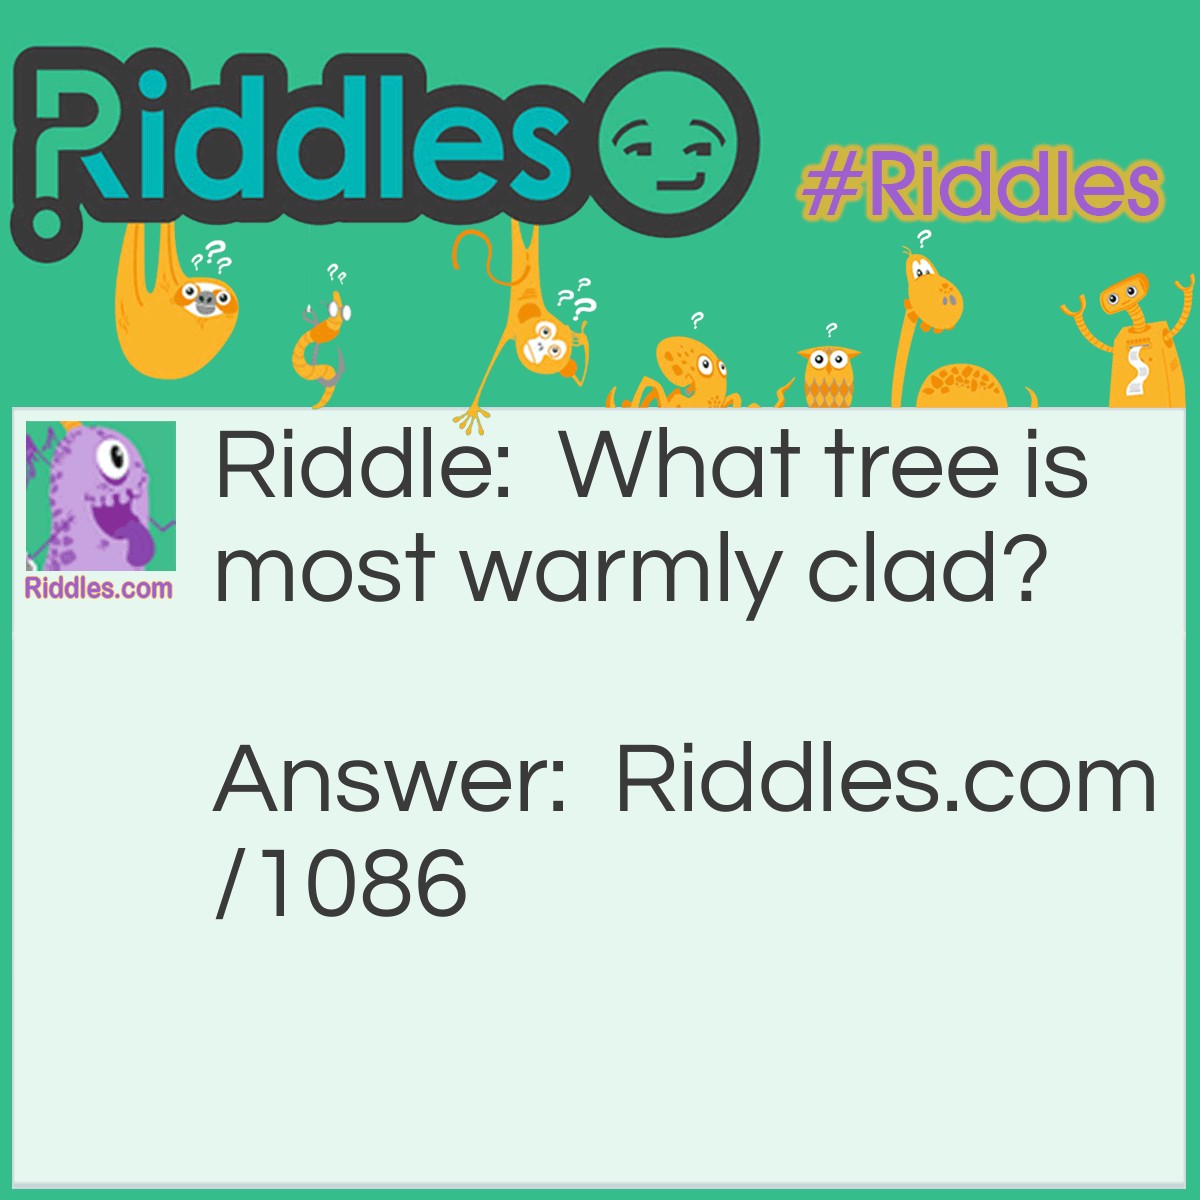 Riddle: What tree is most warmly clad? Answer: A Fir Tree